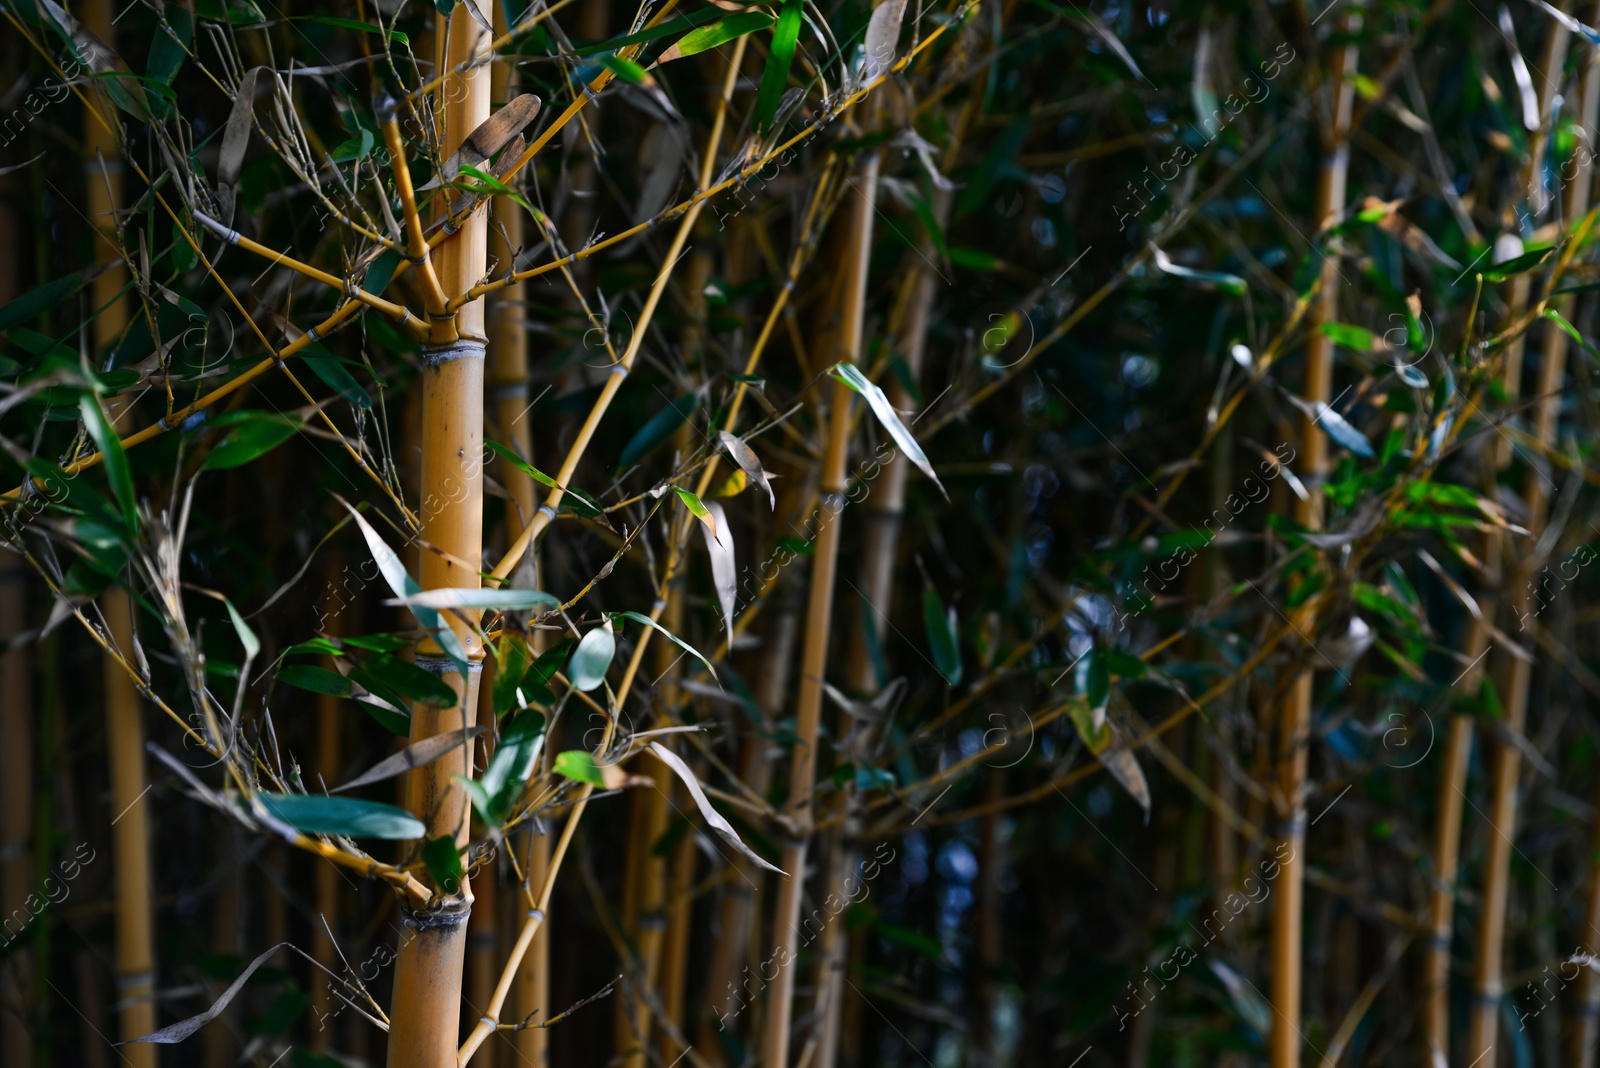 Photo of Beautiful bamboo plants with lush green leaves growing outdoors, closeup